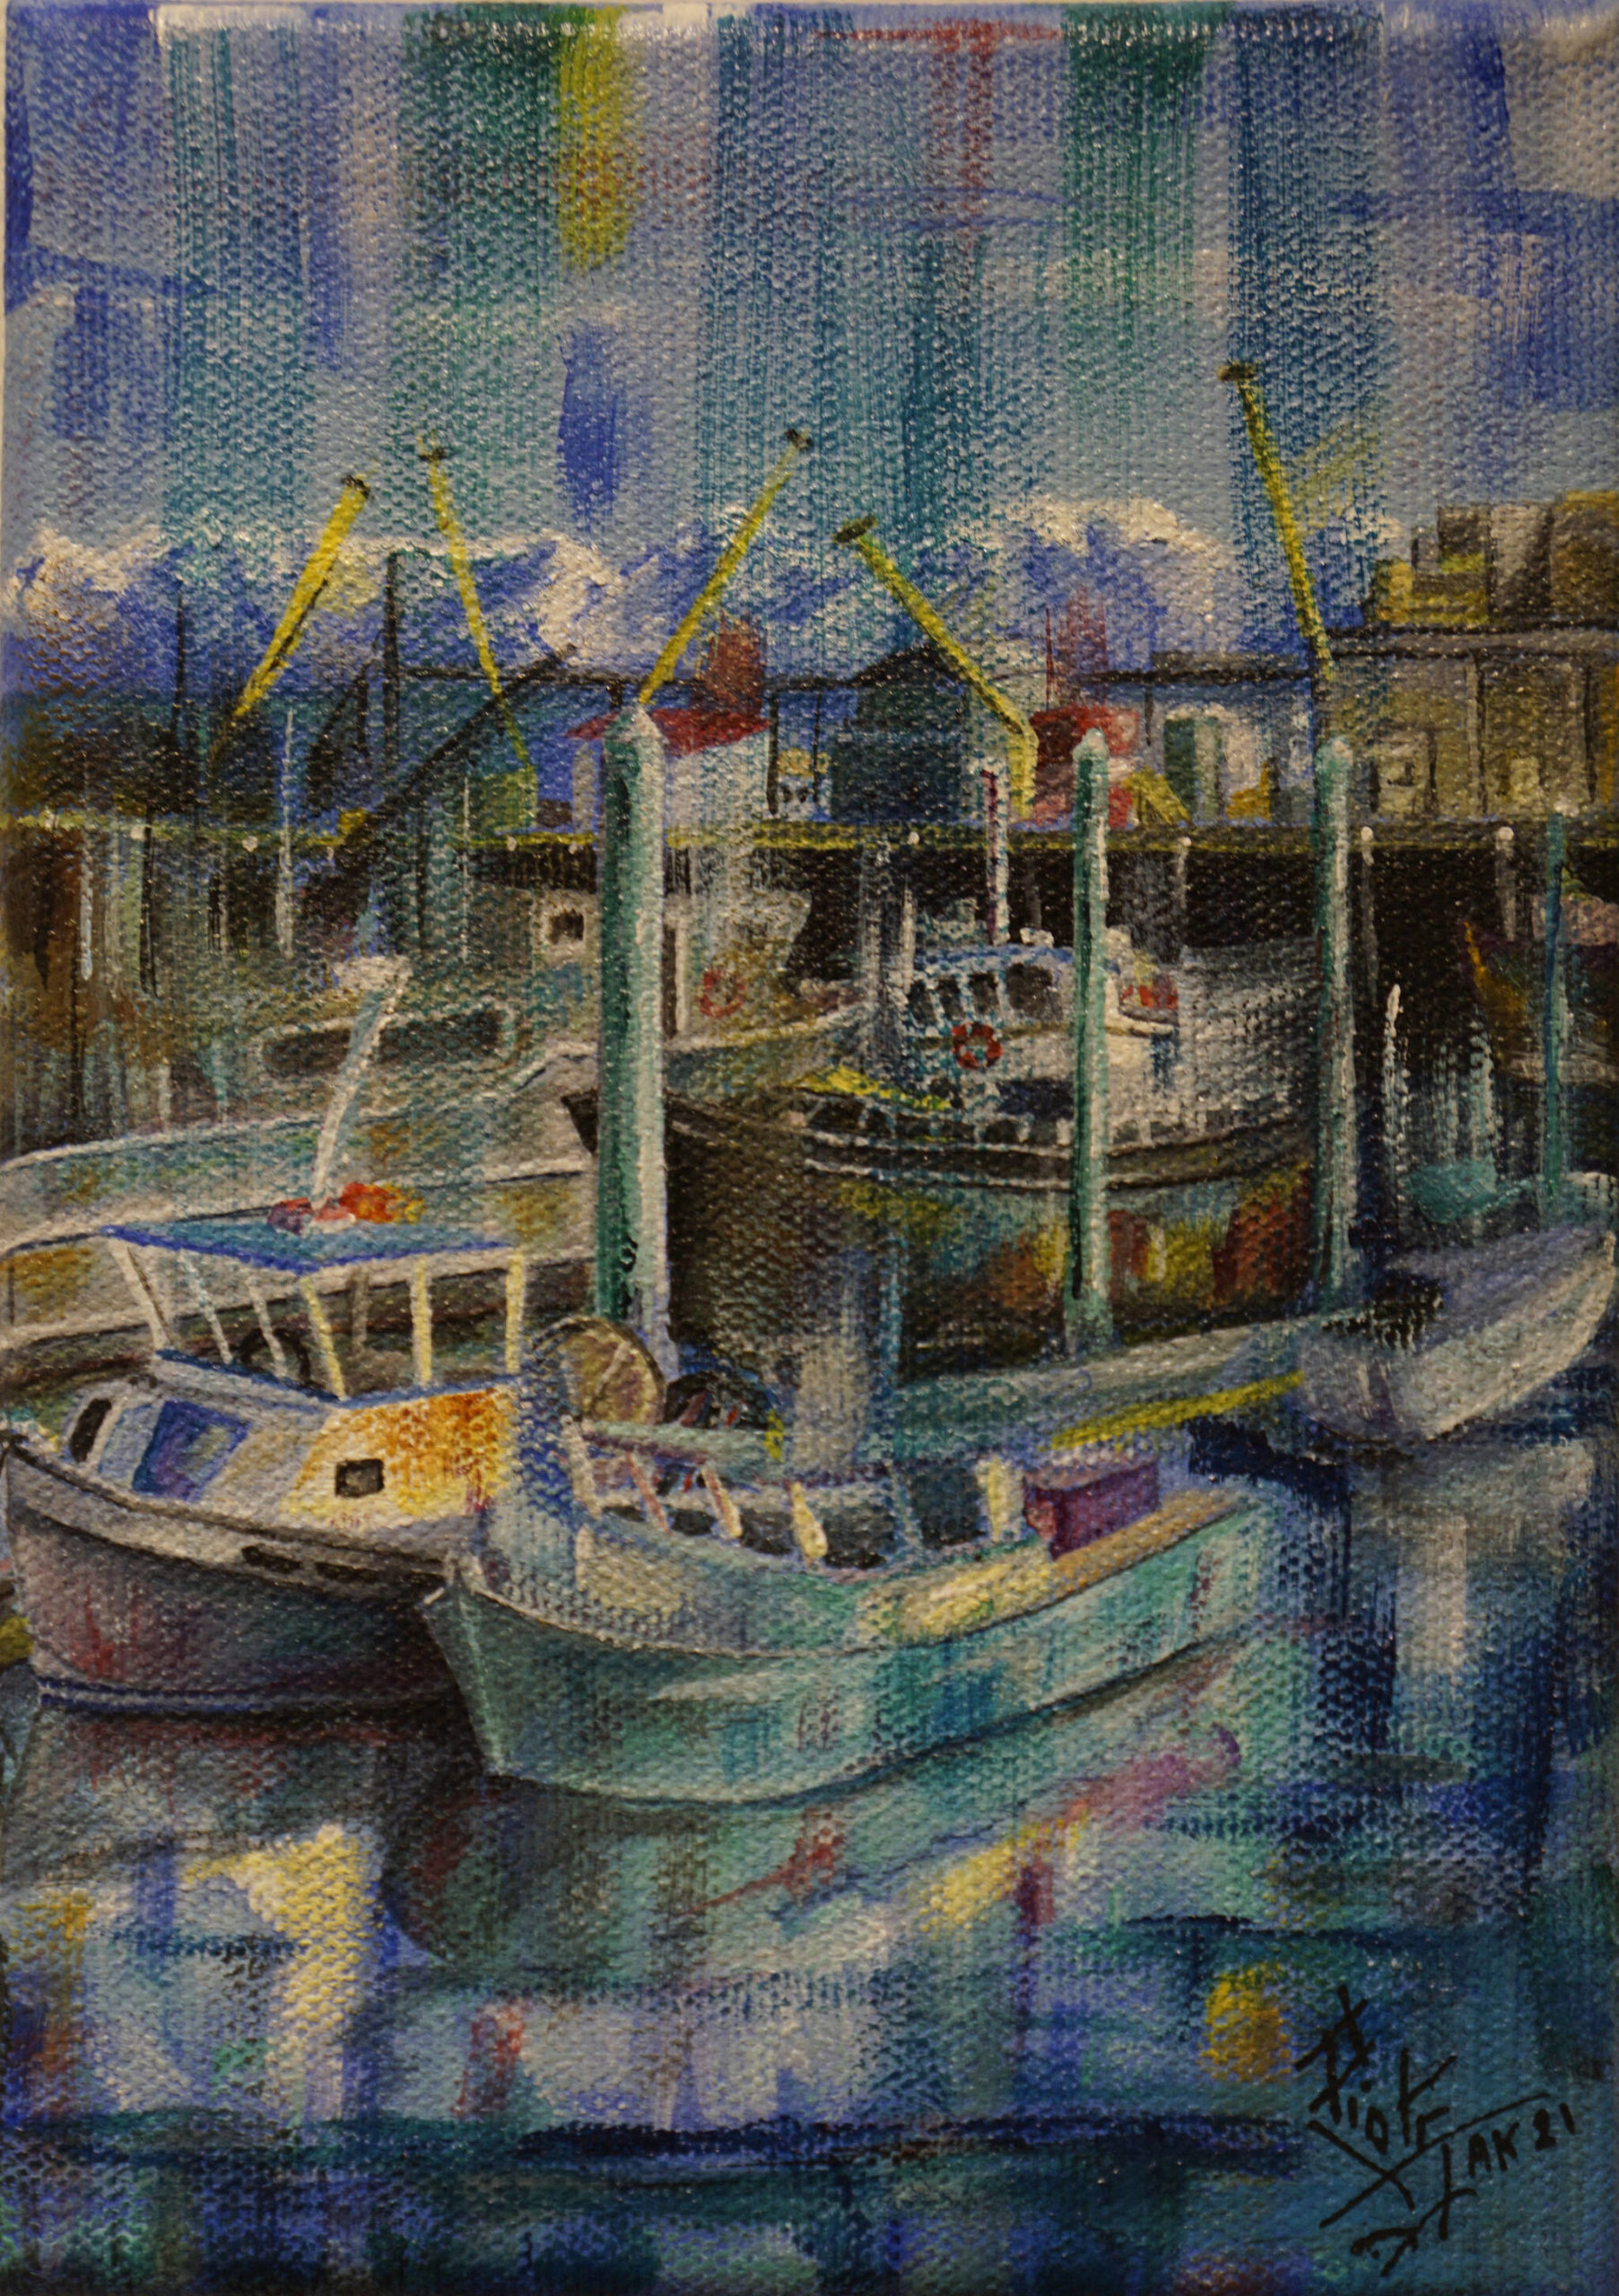 Jozef Pawlikowski’s “Homer Harbor” is one of the works showing in the Homer Council on the Arts “Fun wtih 5x7” show through Dec. 22, 2021, at the gallery in Homer, Alaska. (Photo by Michael Armstrong/Homer News)